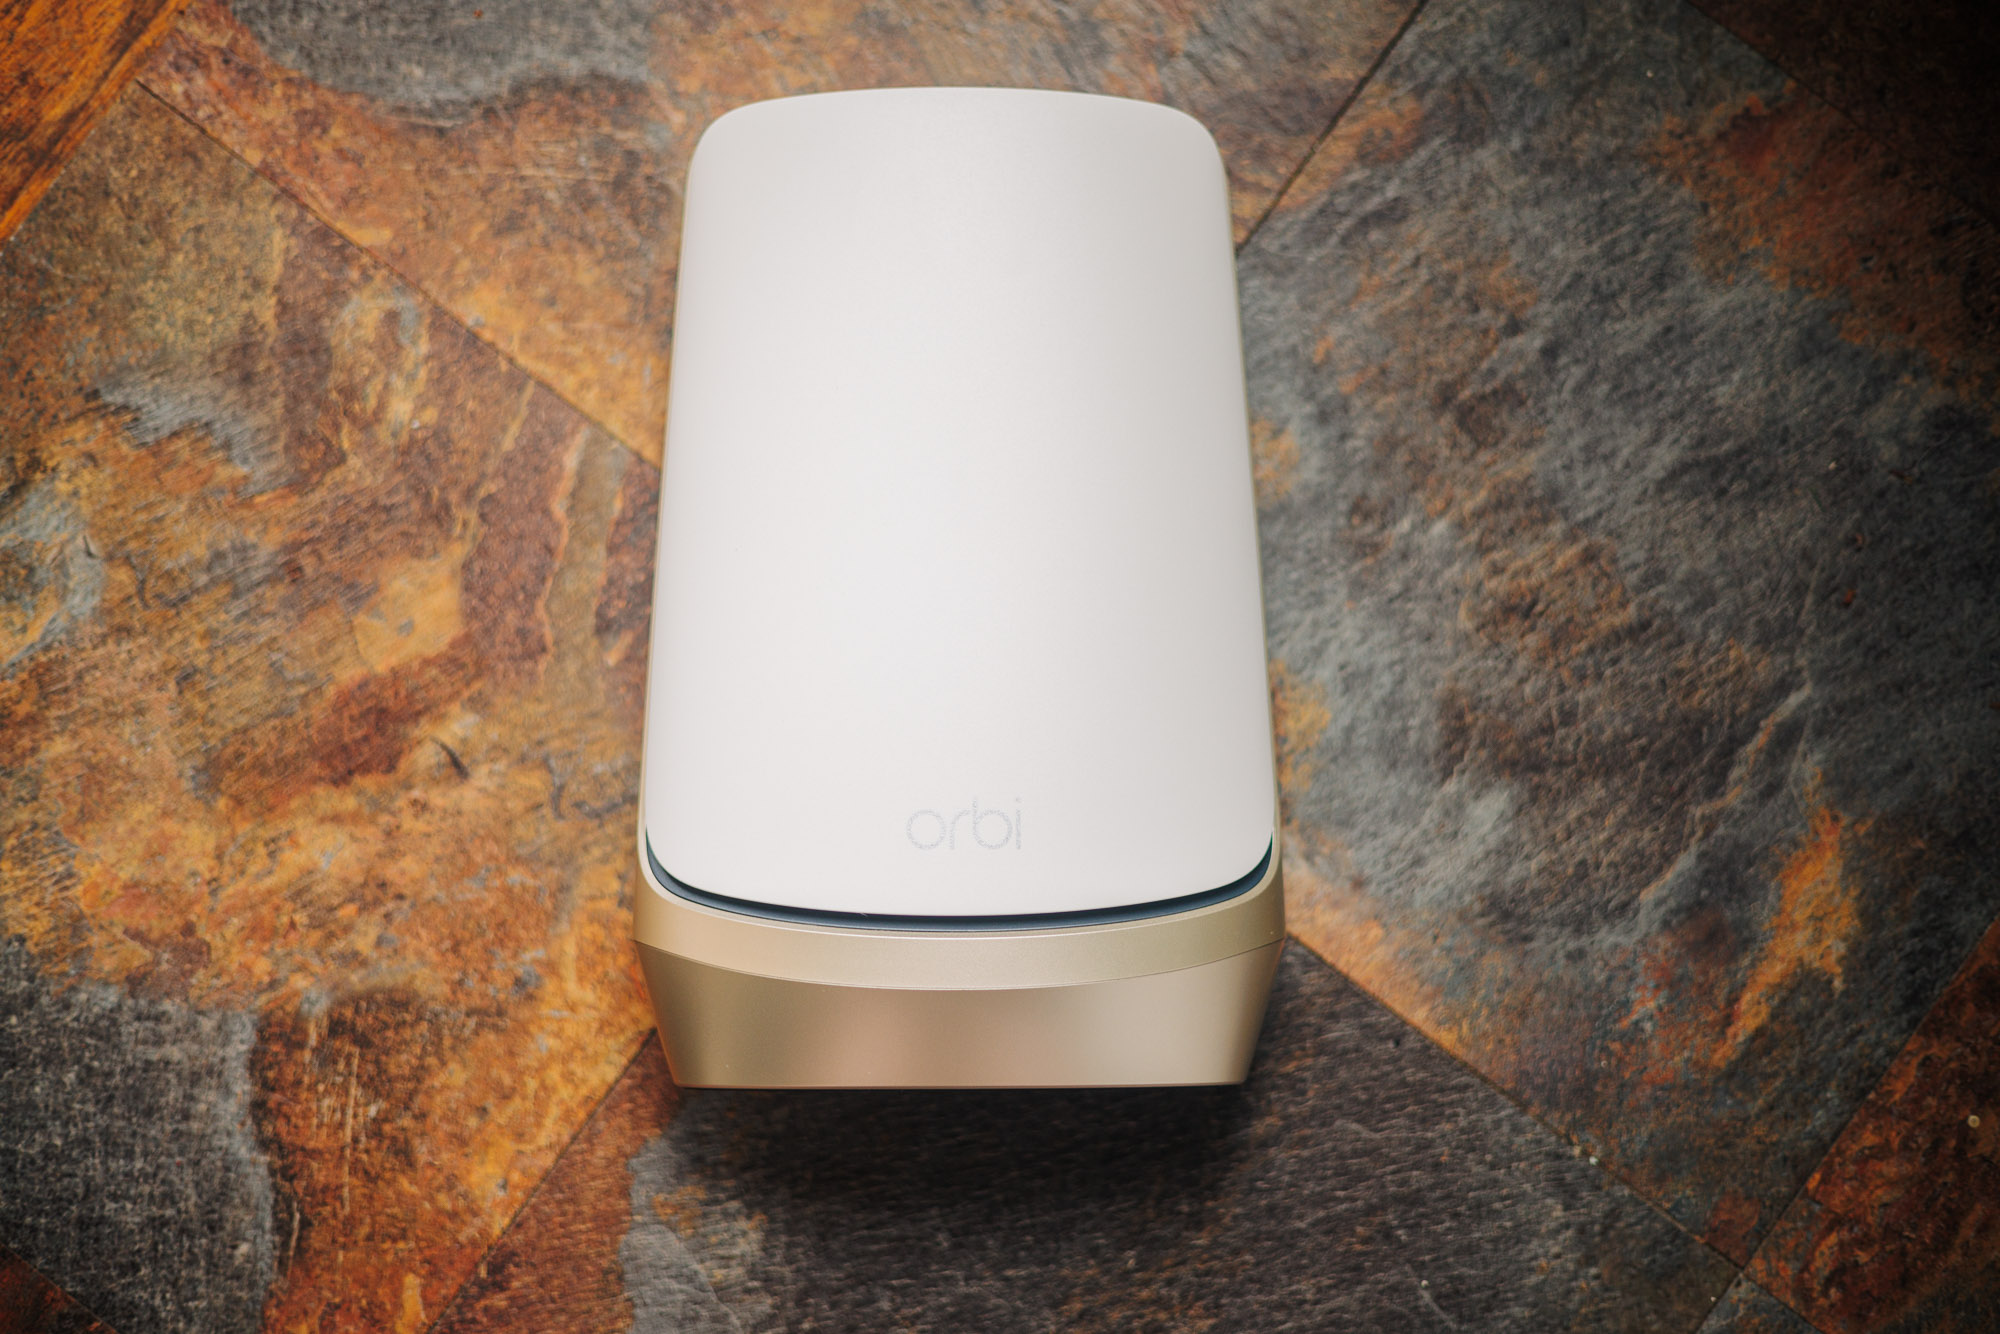 Netgear Orbi Review: The Best Mesh Router You Can Buy Today